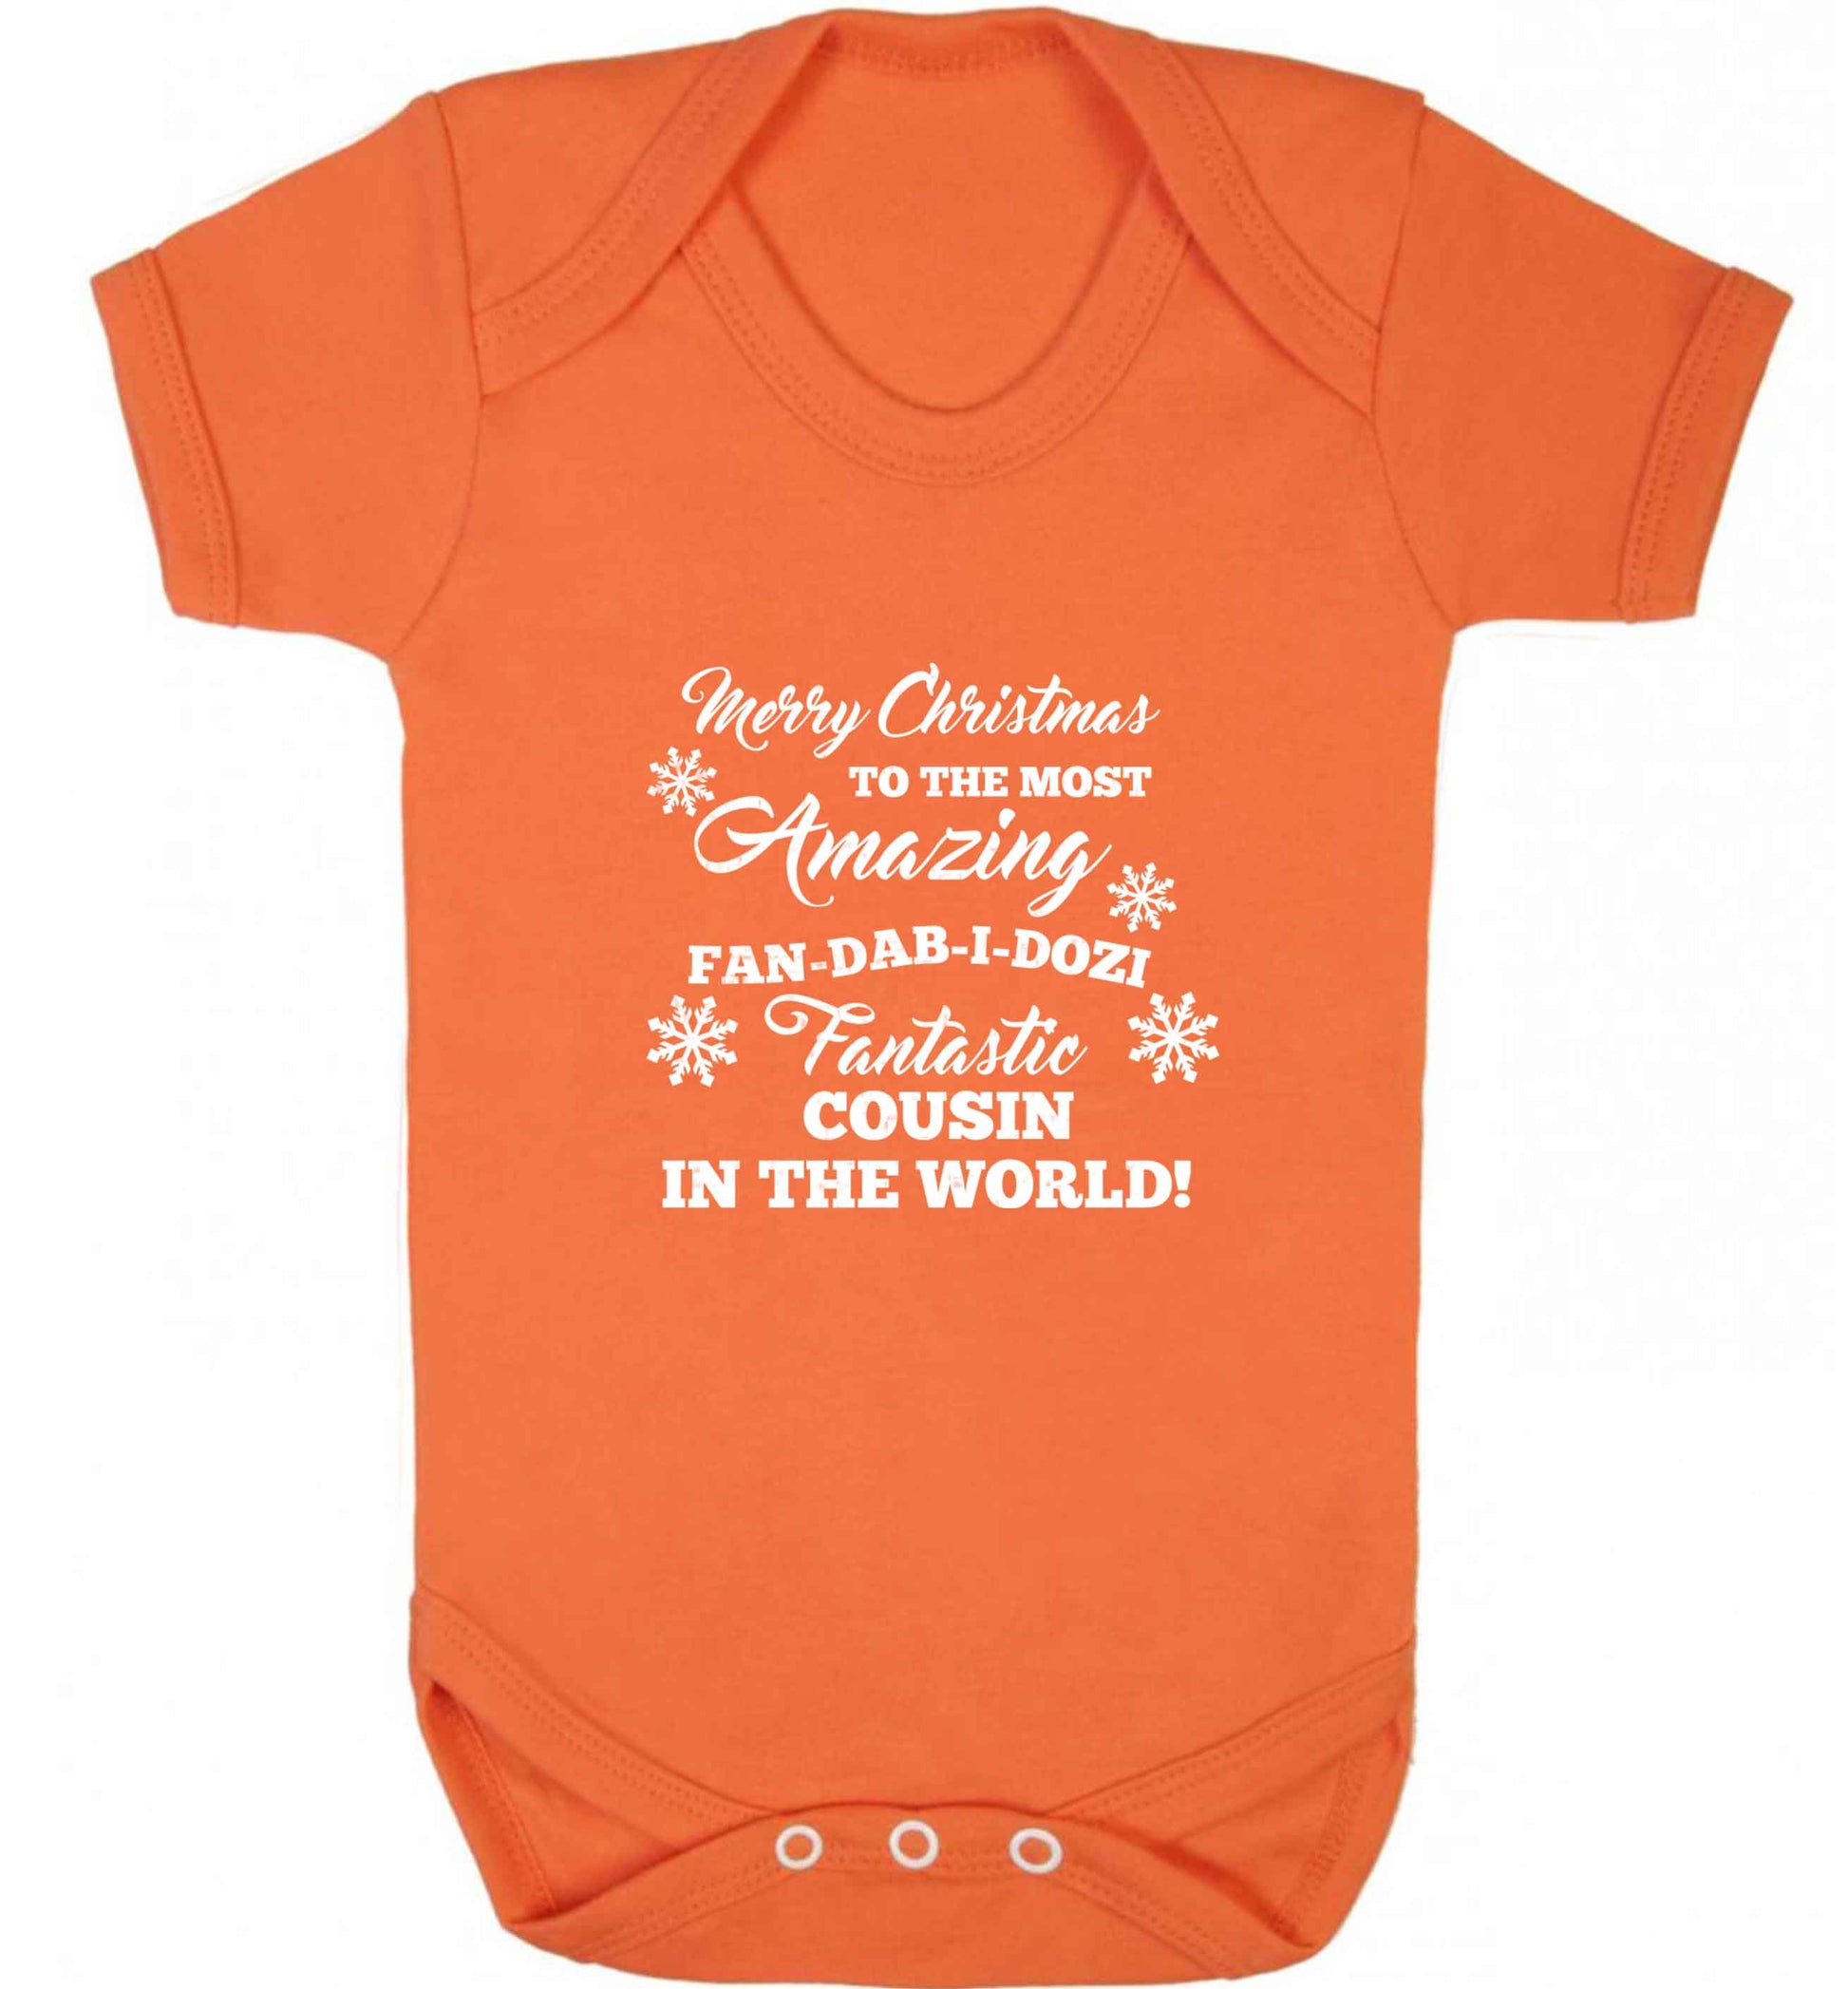 Merry Christmas to the most amazing fan-dab-i-dozi fantasic Cousin in the world baby vest orange 18-24 months